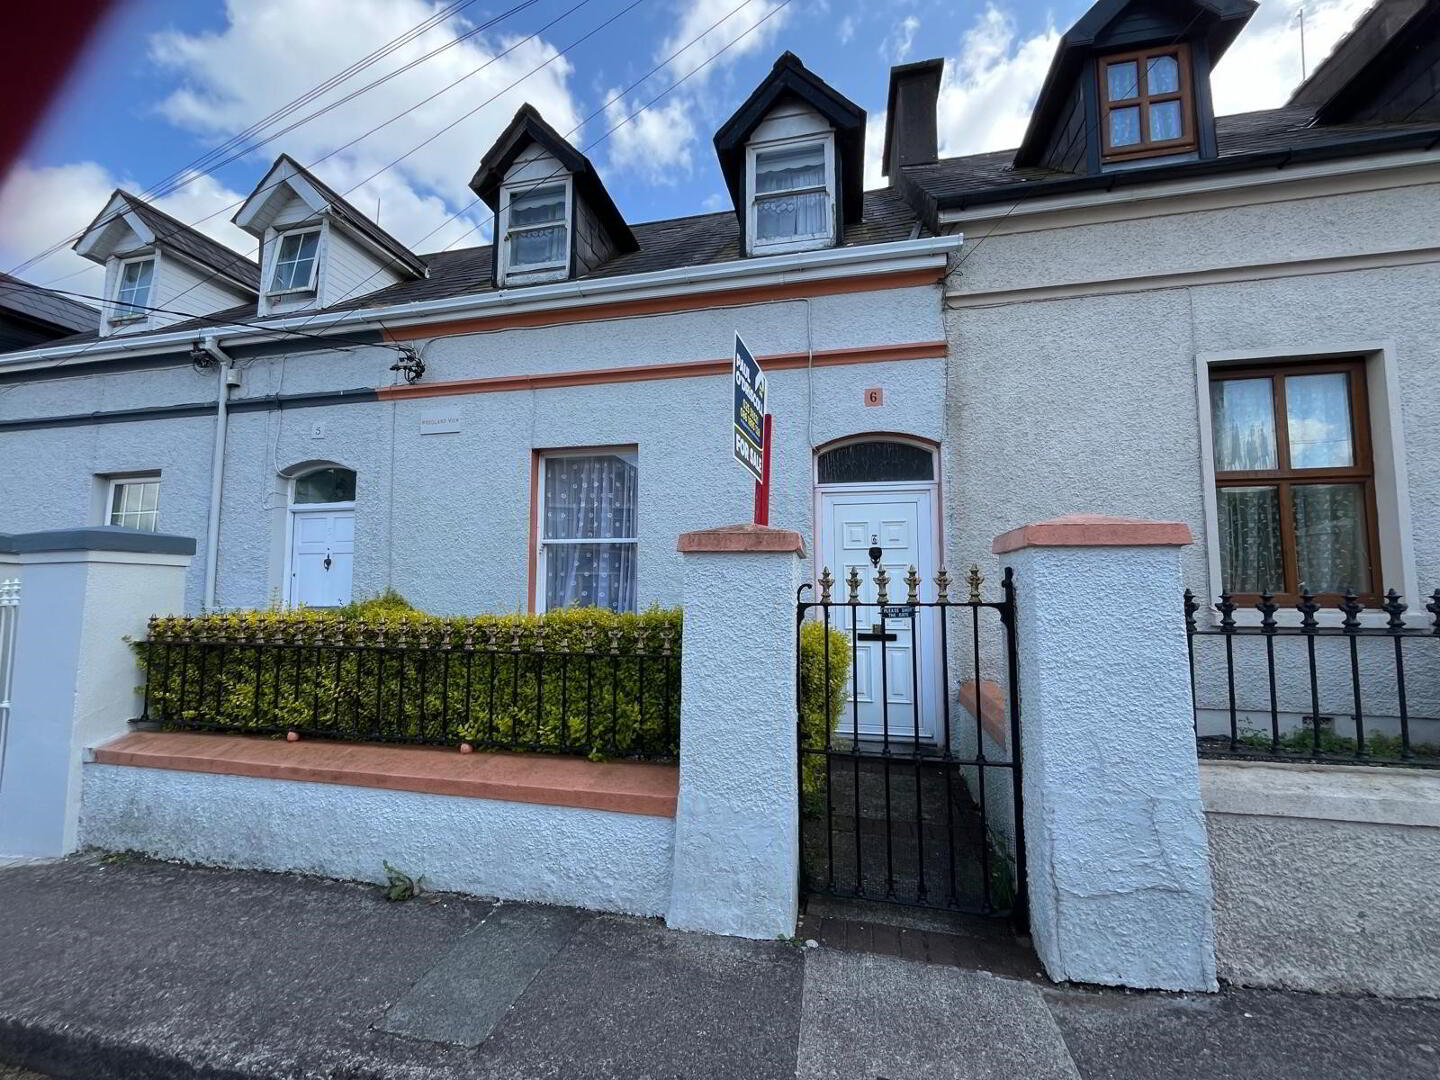 Woodland View, 6 Old Youghal Road